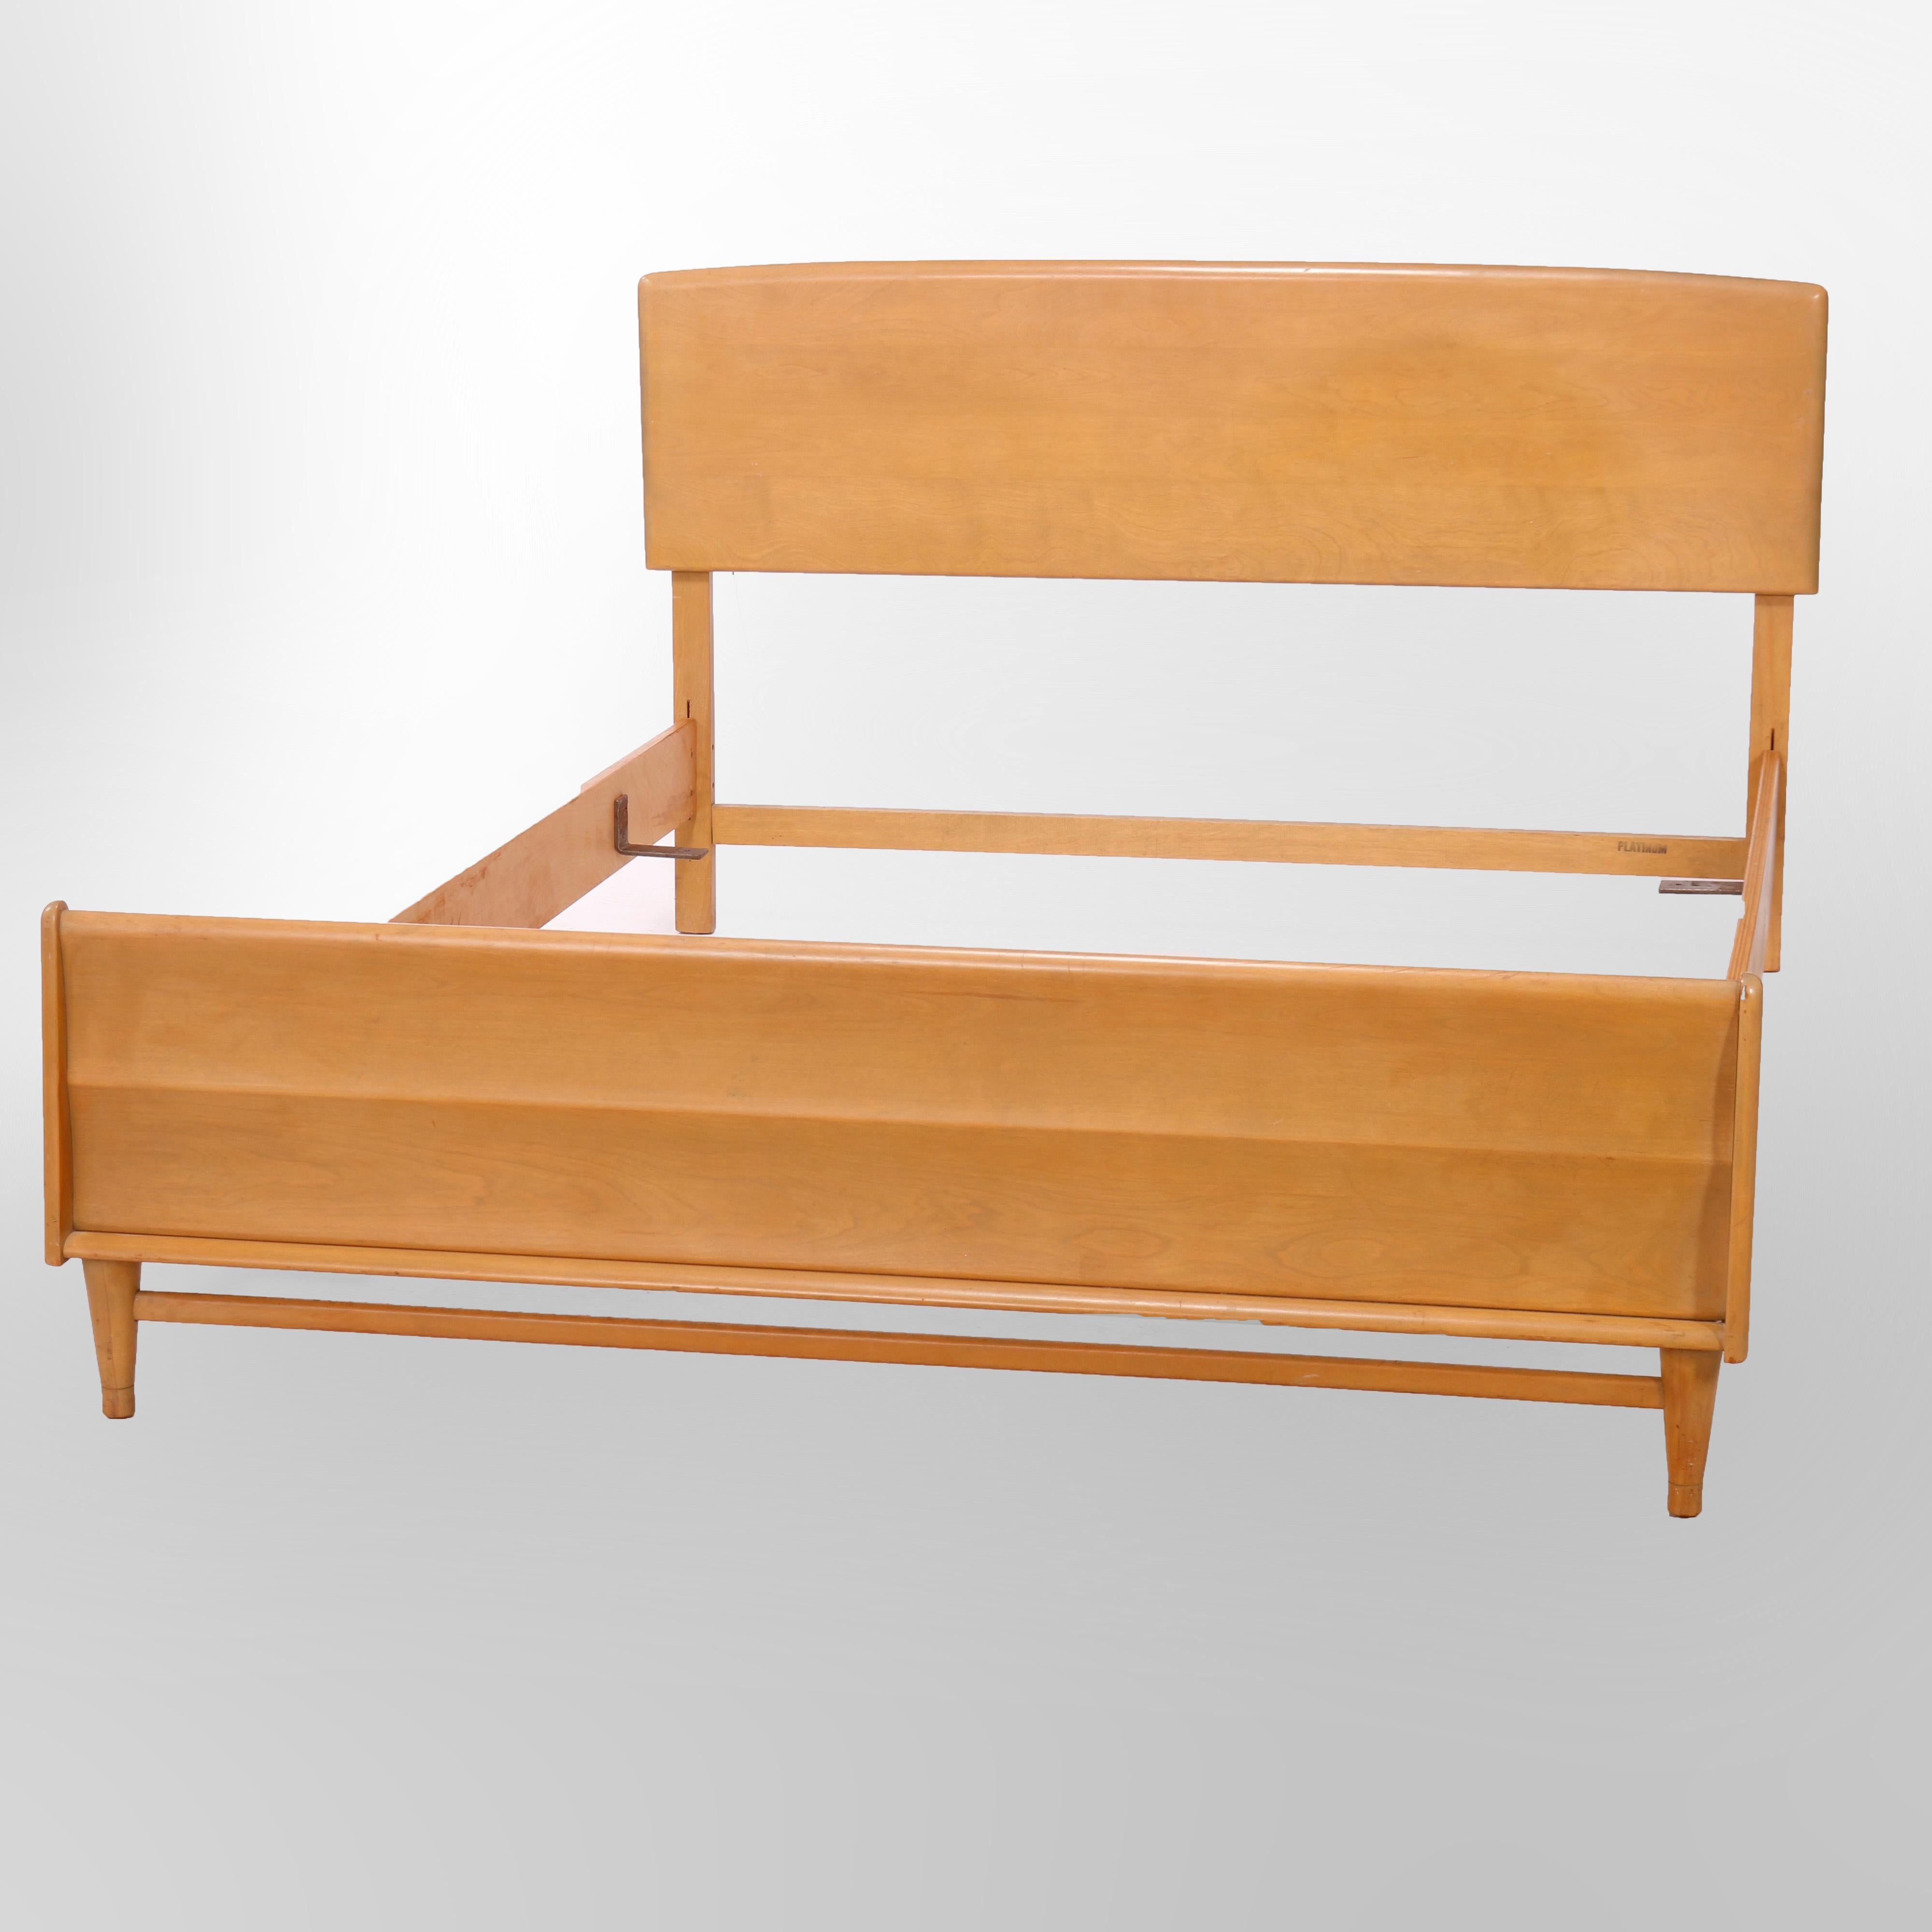 A Mid Century Modern full or double bed frame by Heywood Wakefield offers birch construction in Platinum finish, maker stamp as photographed, mid 20th century

Measures - overall 35''h x 59''w x 80.75''d; interior 7.5